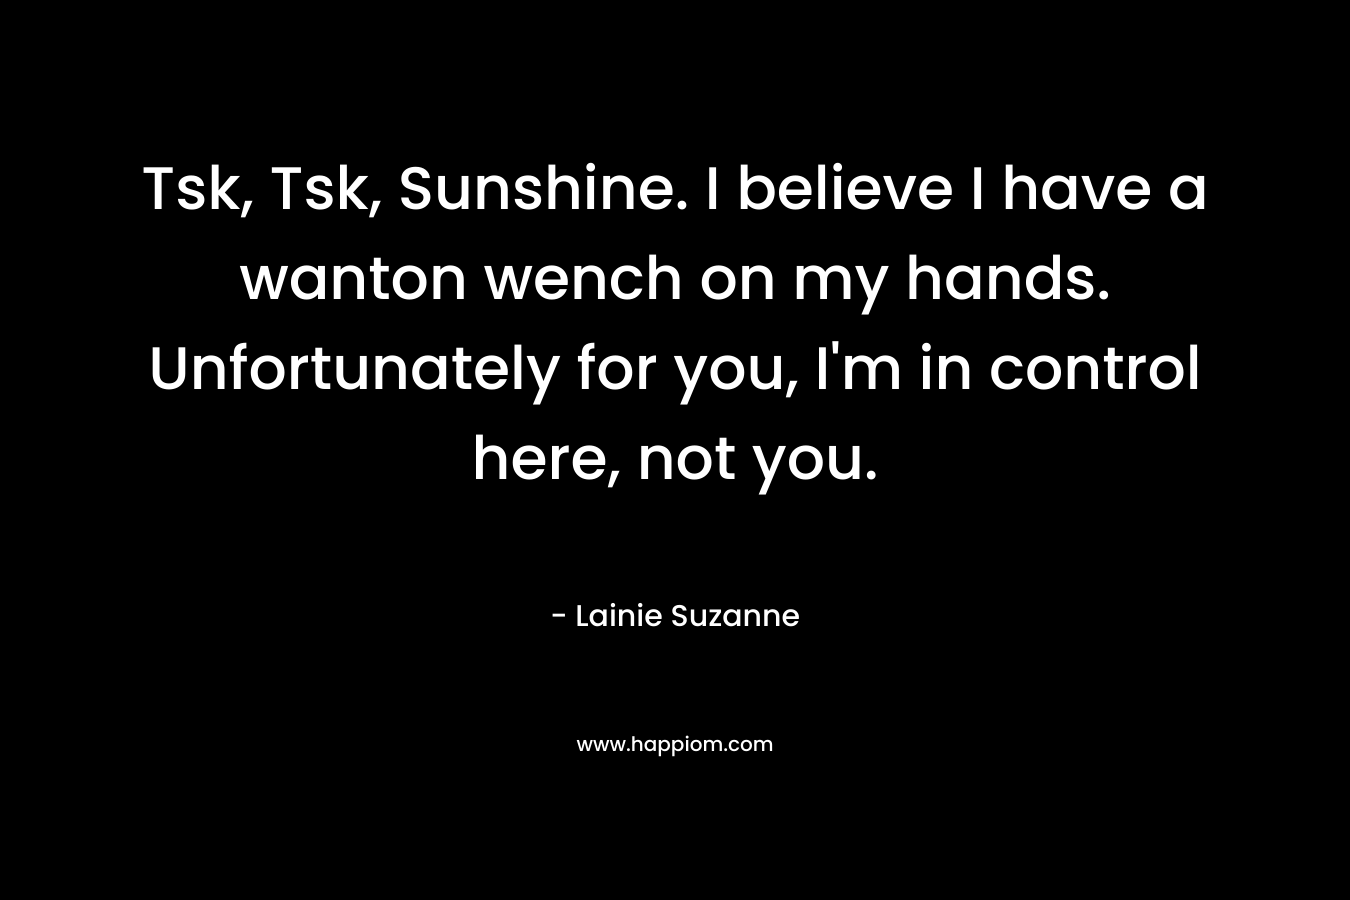 Tsk, Tsk, Sunshine. I believe I have a wanton wench on my hands. Unfortunately for you, I’m in control here, not you. – Lainie Suzanne